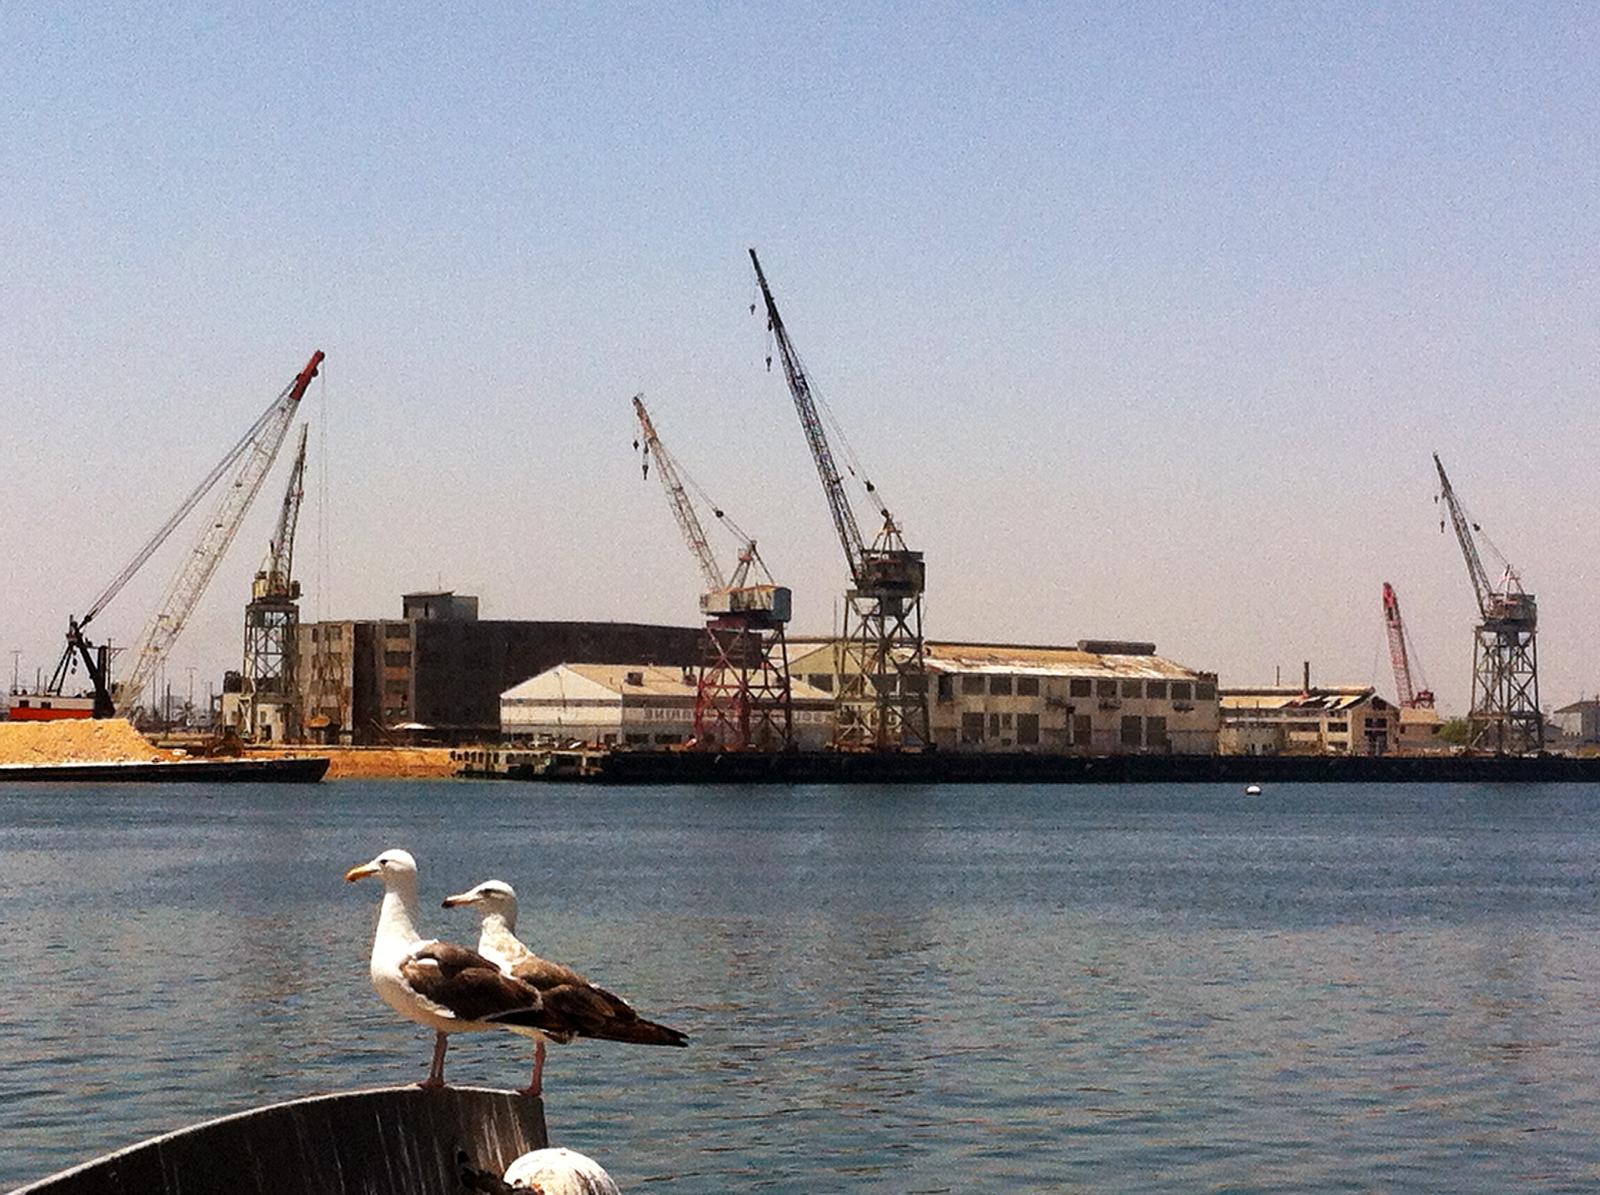 View of two seagulls and terminal island